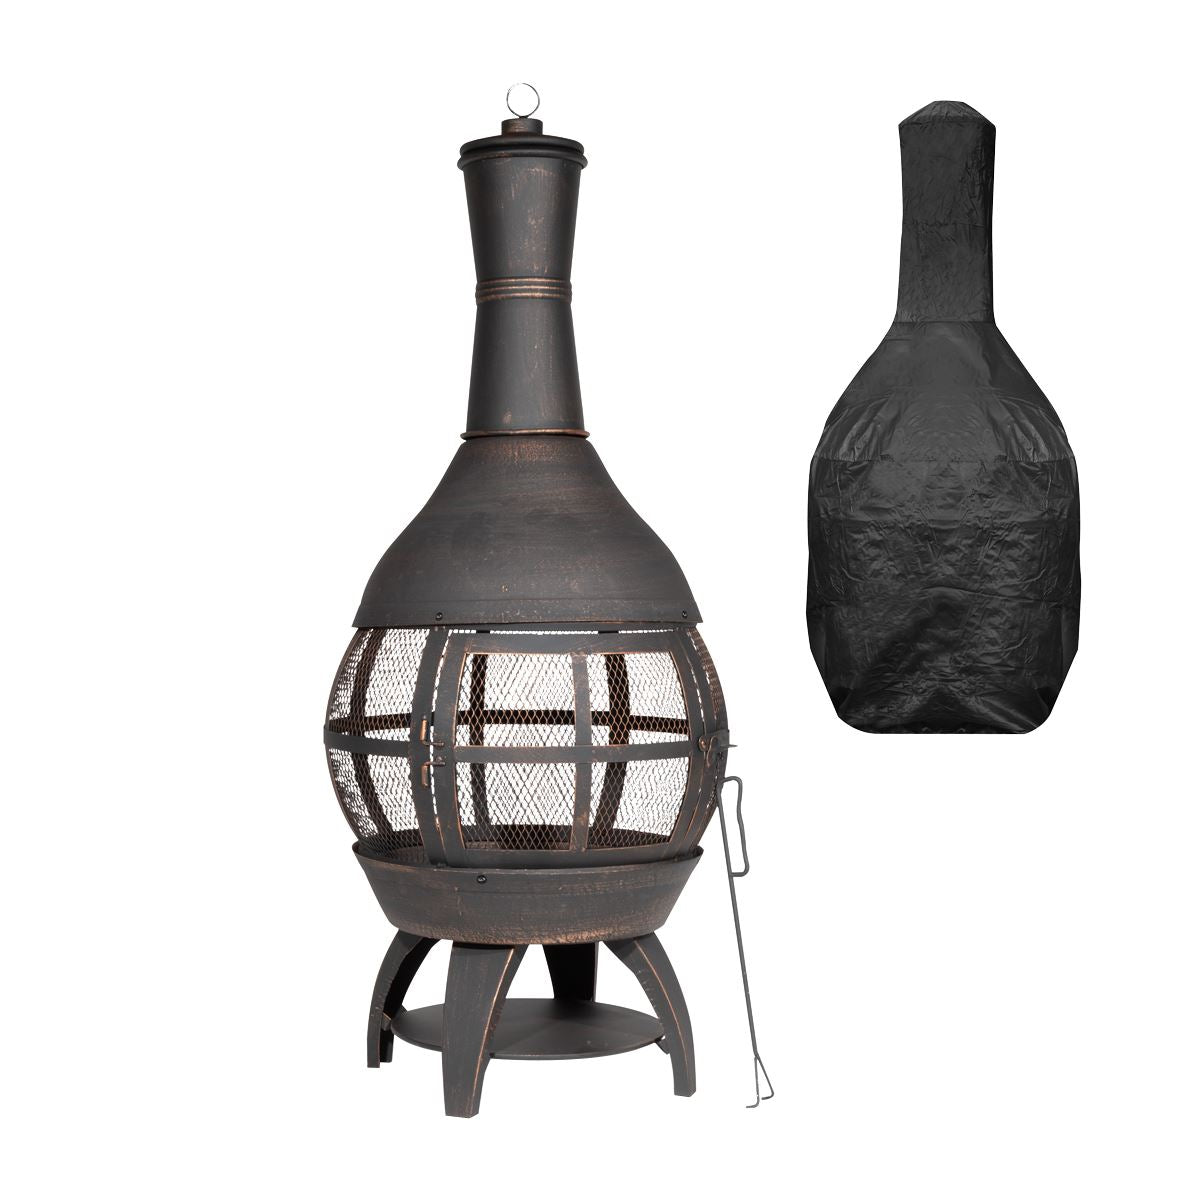 Dellonda Deluxe 360° Chiminea/Fire Pit/Outdoor Heater with Fire Poker & Water Resistant Drawstring Cover - Antique Bronze Finish - DG241